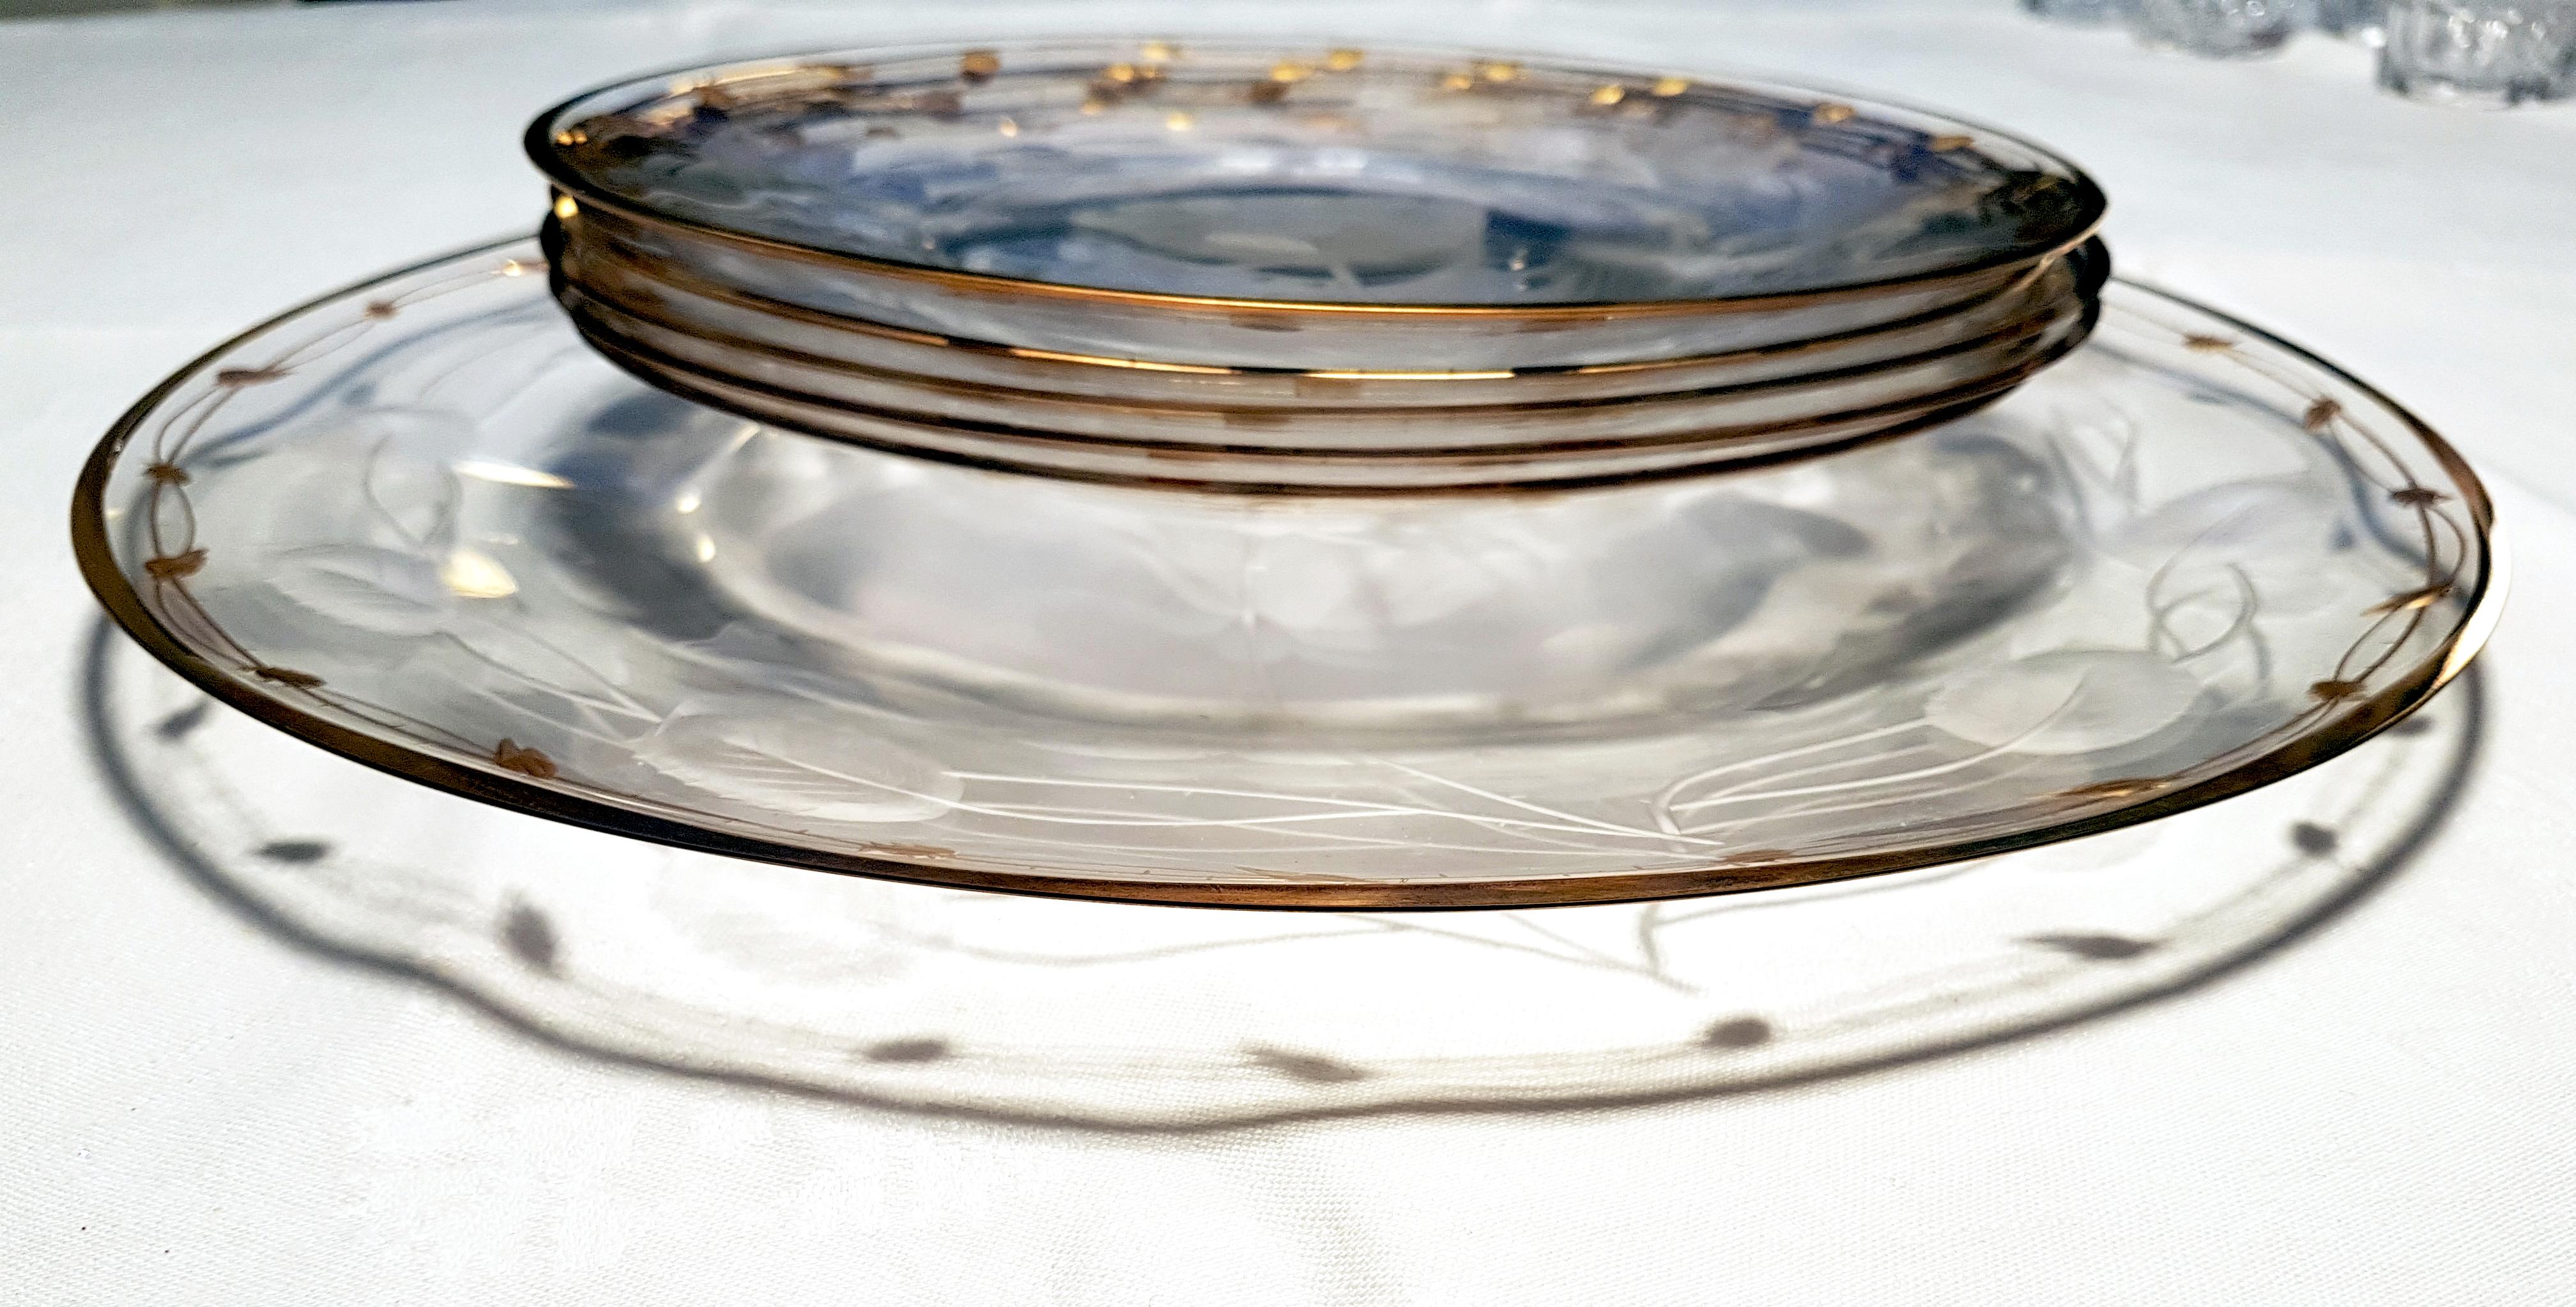 Serving Plate Art Nouveau Hand Blown, Engraved, Gilded Rose 'Paula' by Moser 1